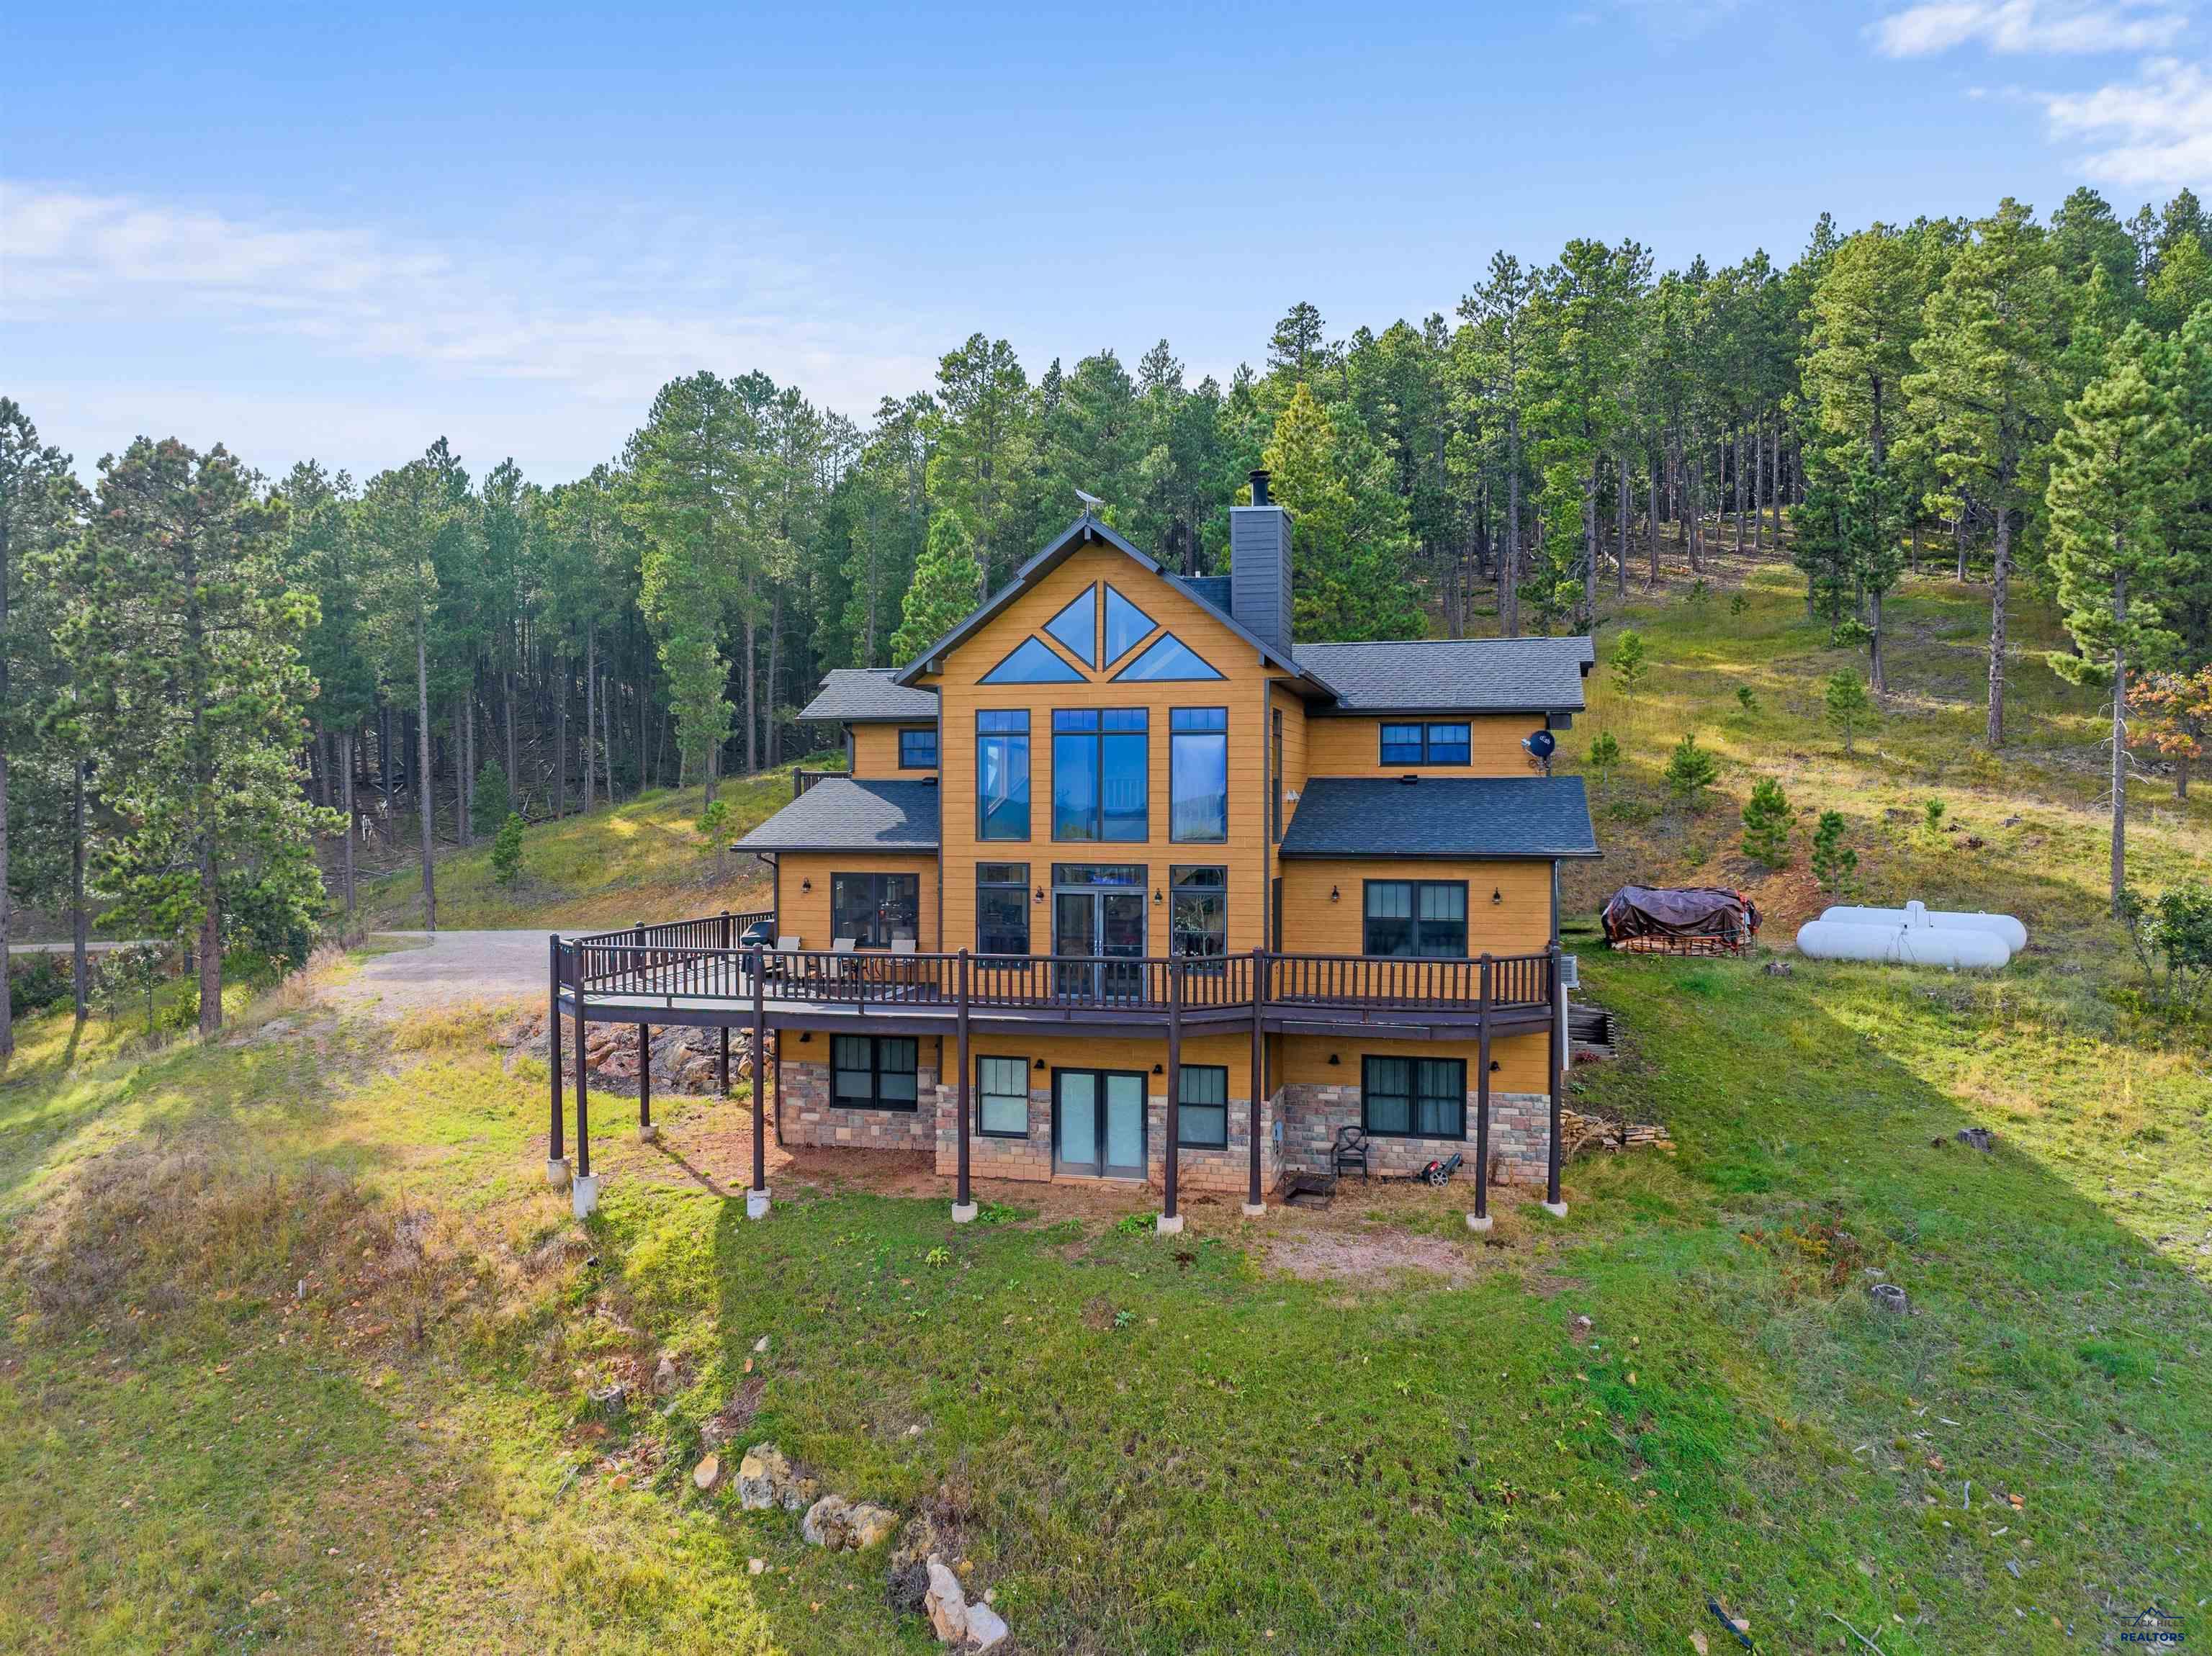 If privacy with a view is what you are looking for then this 9+ acre oasis just 3 miles away from historic downtown Deadwood is for you! This 3-story home boasts 5 bedrooms/3 bathrooms and is free from any restrictive covenants or HOA regulations. Enjoy the spacious 32x72 shop that can hold all of your summer and winter vehicles. If you own horses this property is perfect with the horse stalls already in the shop. With its expansive 4,150 square feet of living space, this captivating property offers the perfect blend of tranquility and luxury. The large windows frame panoramic views, inviting the outside in and bathing the living spaces with an abundance of natural light. For nature enthusiasts, the property's border with the forest service ensures direct access to the beauty of the outdoors. Don't miss the chance to make this mountain retreat your own and experience the beauty and tranquility it has to offer. Call Dylon Vasknetz with The Real Estate Center of Sturgis (605) 490-0588!